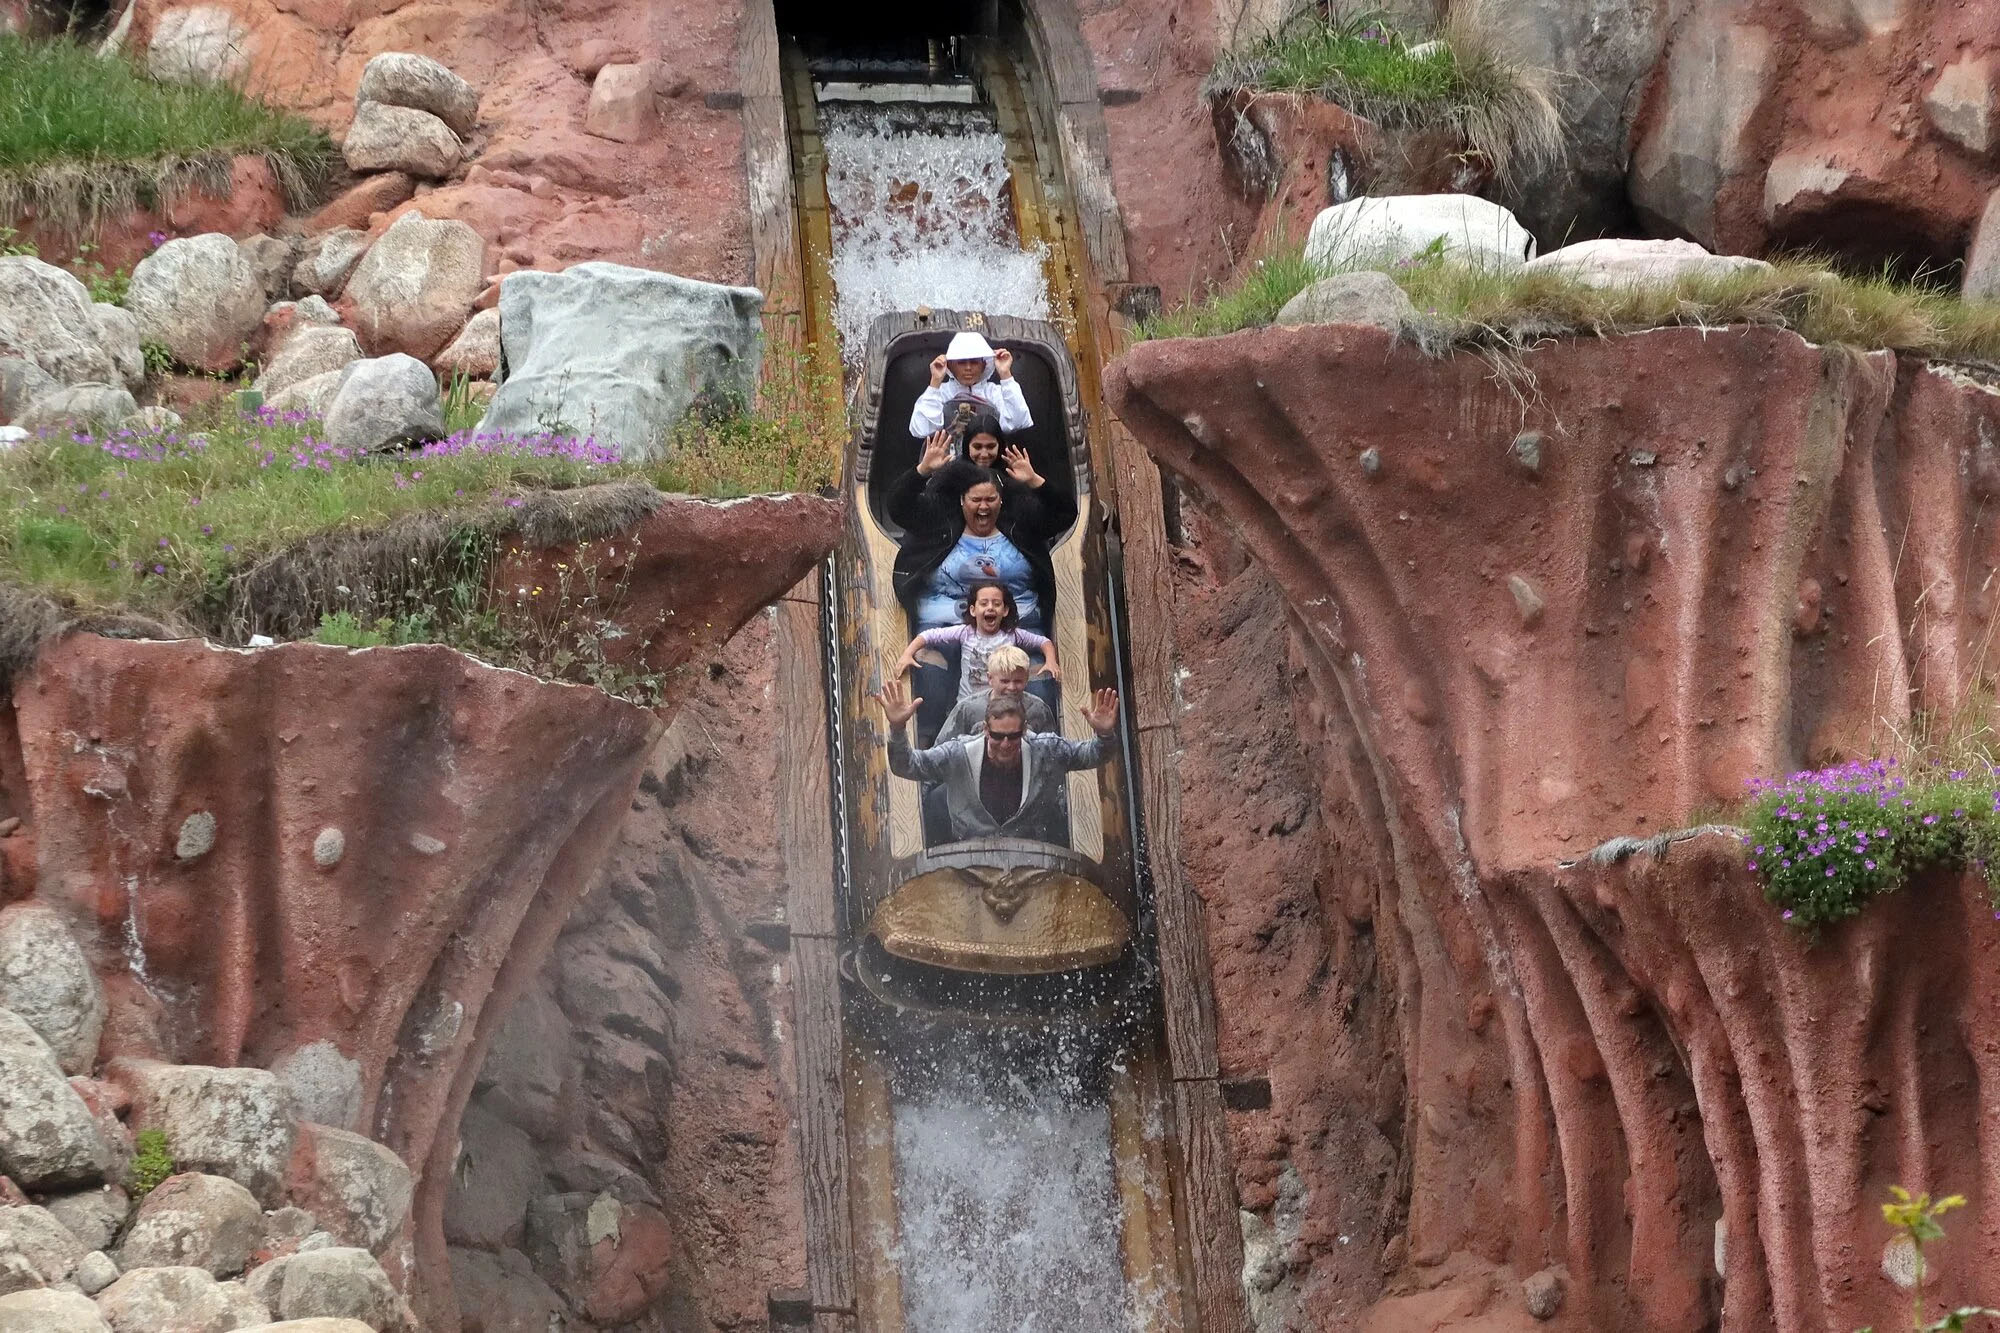 Disneyland rider apparently leaps out of Sprinkle Mountain boat mid-ride in the midst of fit of anxiety